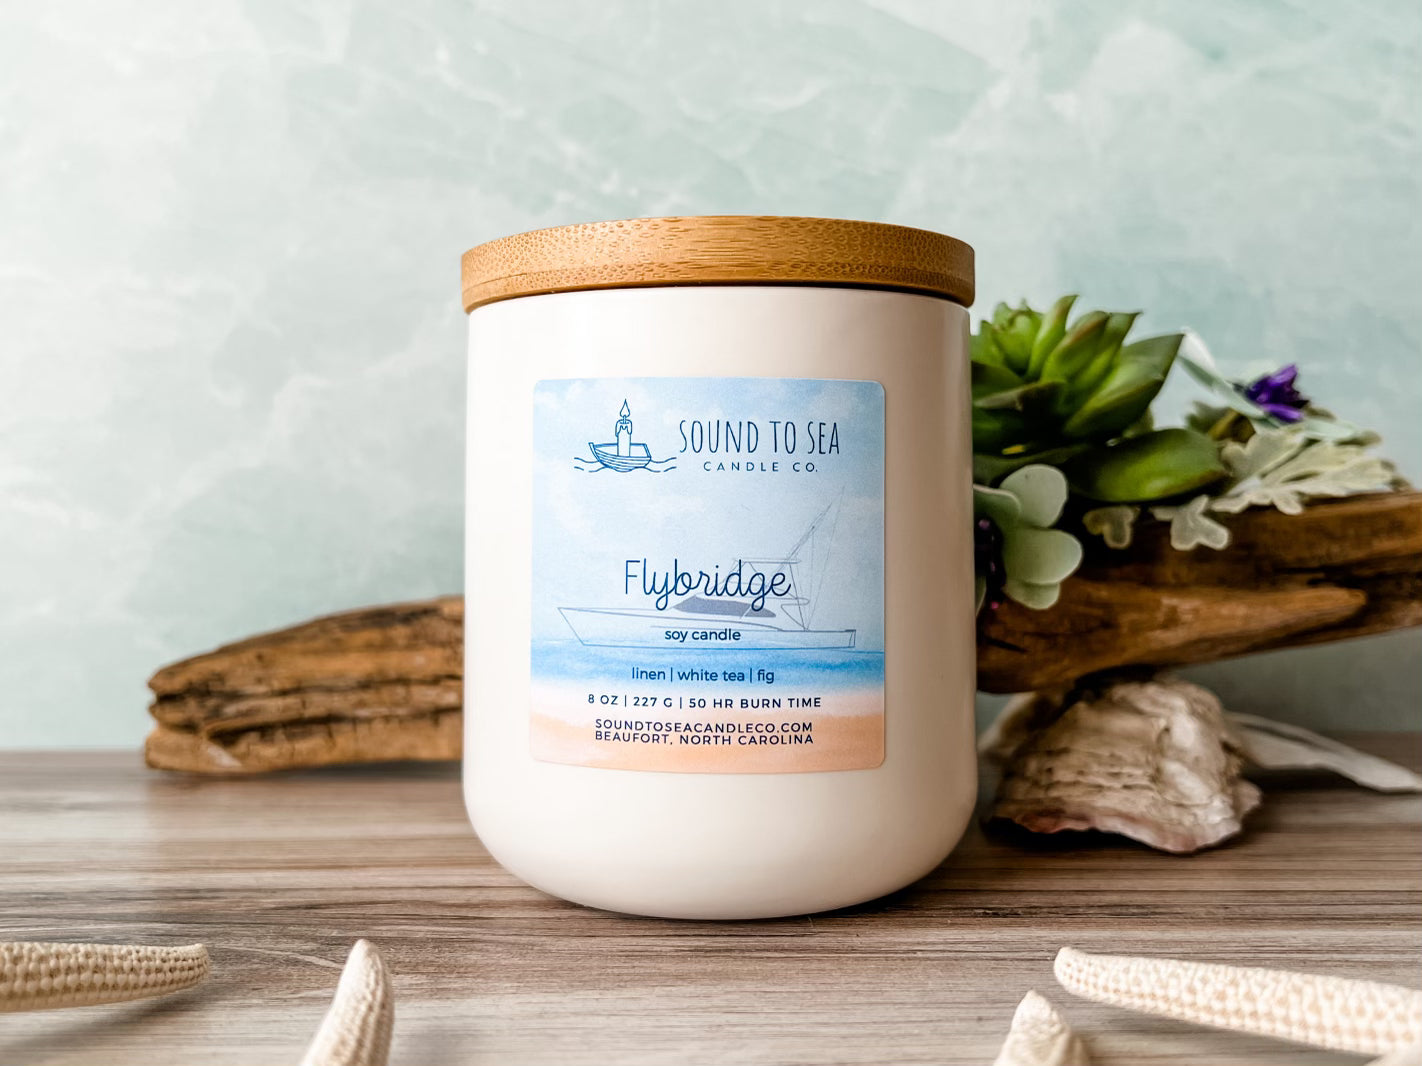 Sand and Sea Spray Candle, 8 Oz Soy Candle, Beach Scent 